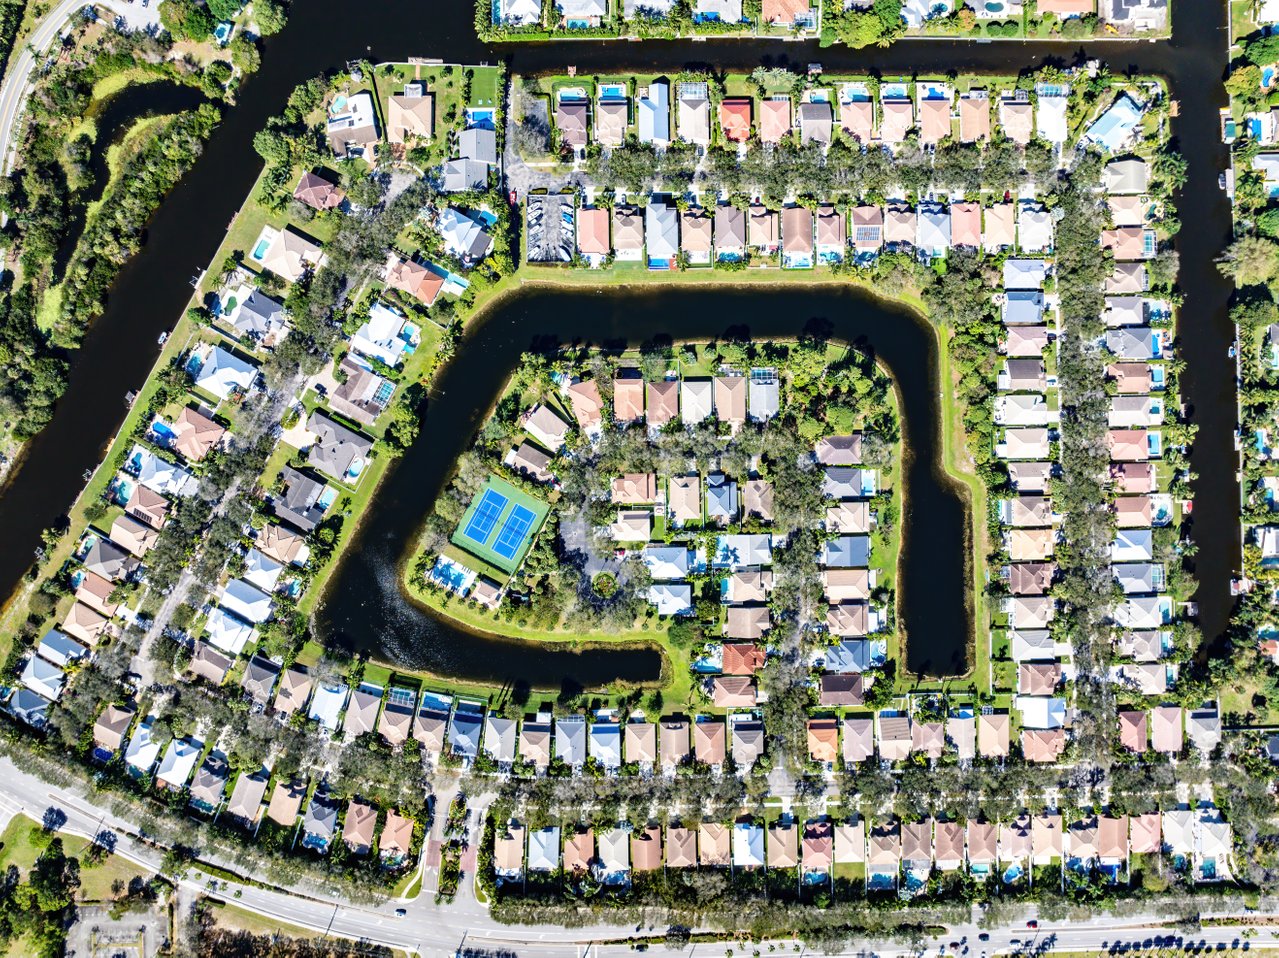 Click the image to see the video of Delray Lakes Community Delray Beach FL 33444